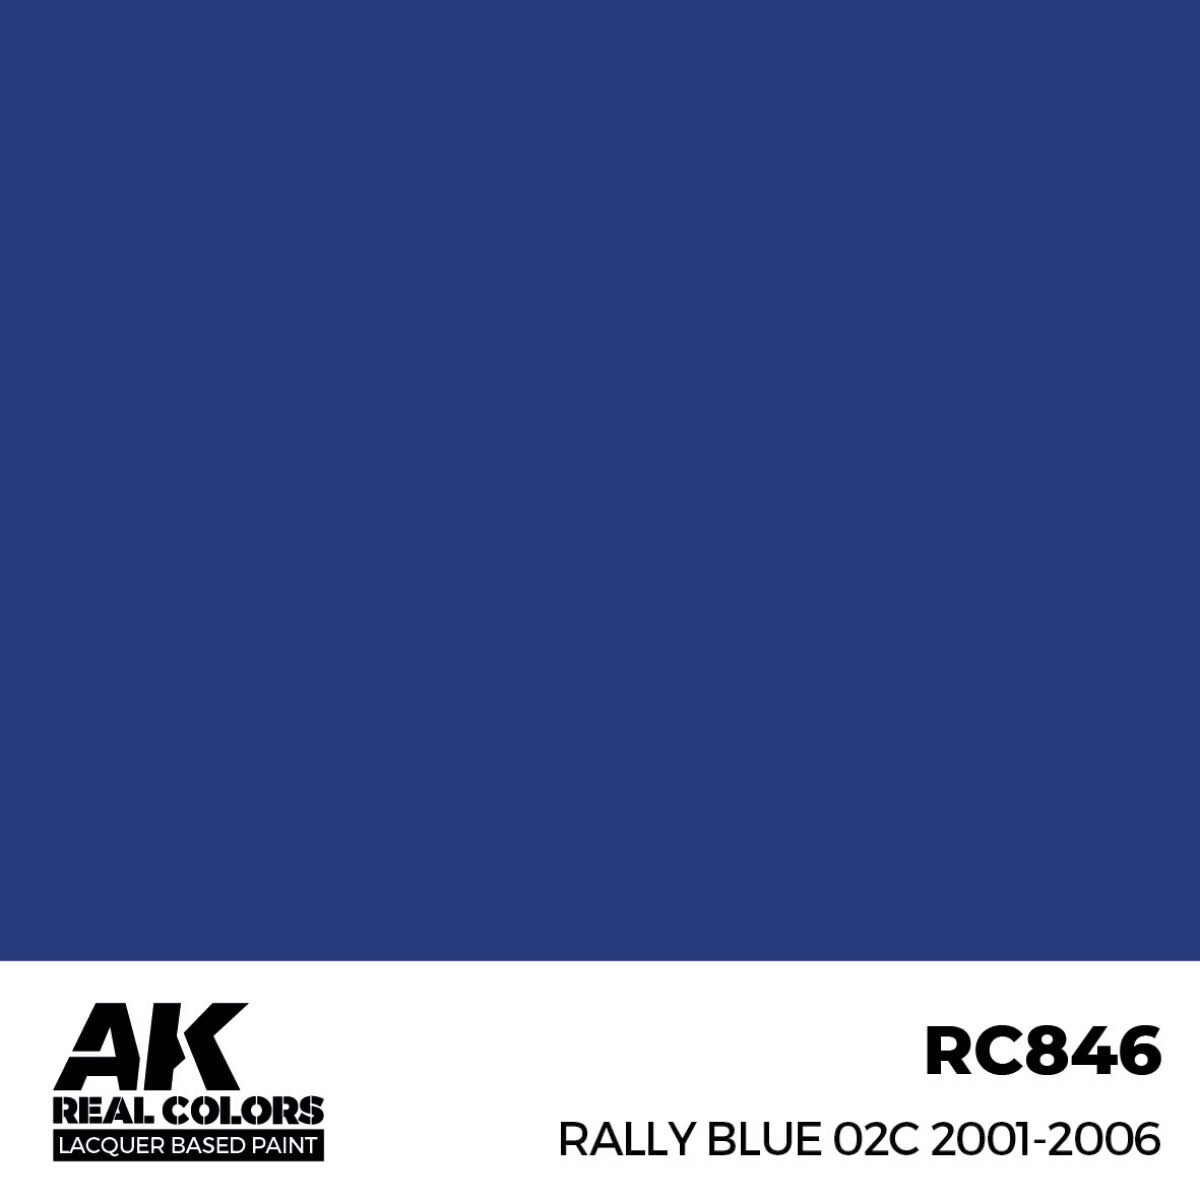 AK RC846 Real Colors Rally Blue 02C 2001-2006 17ml.